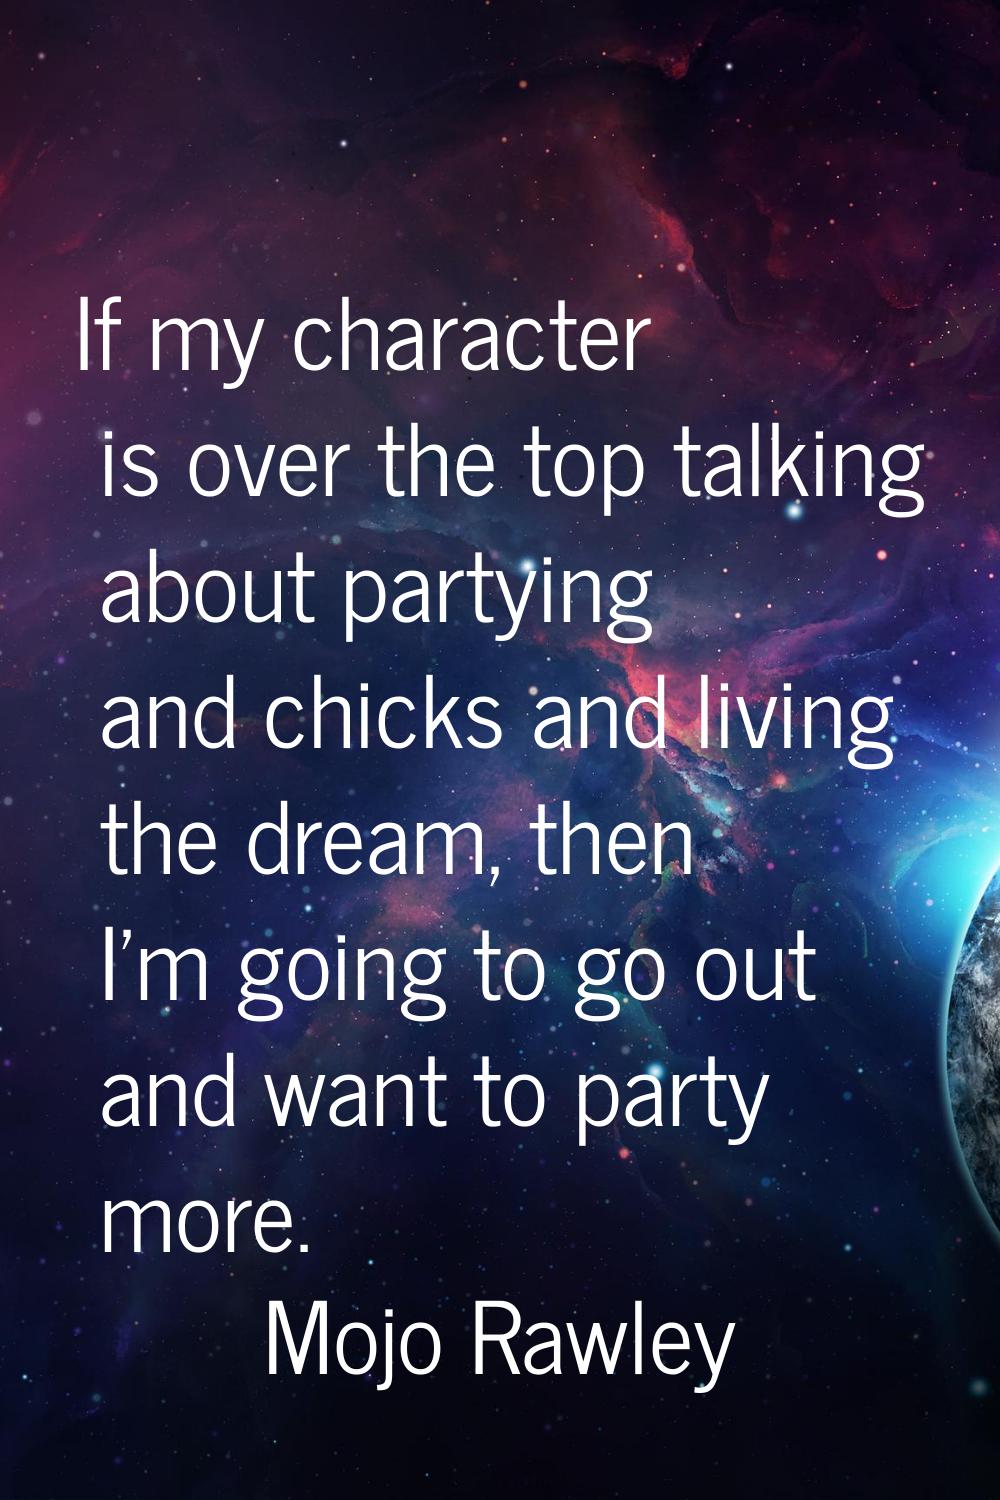 If my character is over the top talking about partying and chicks and living the dream, then I'm go